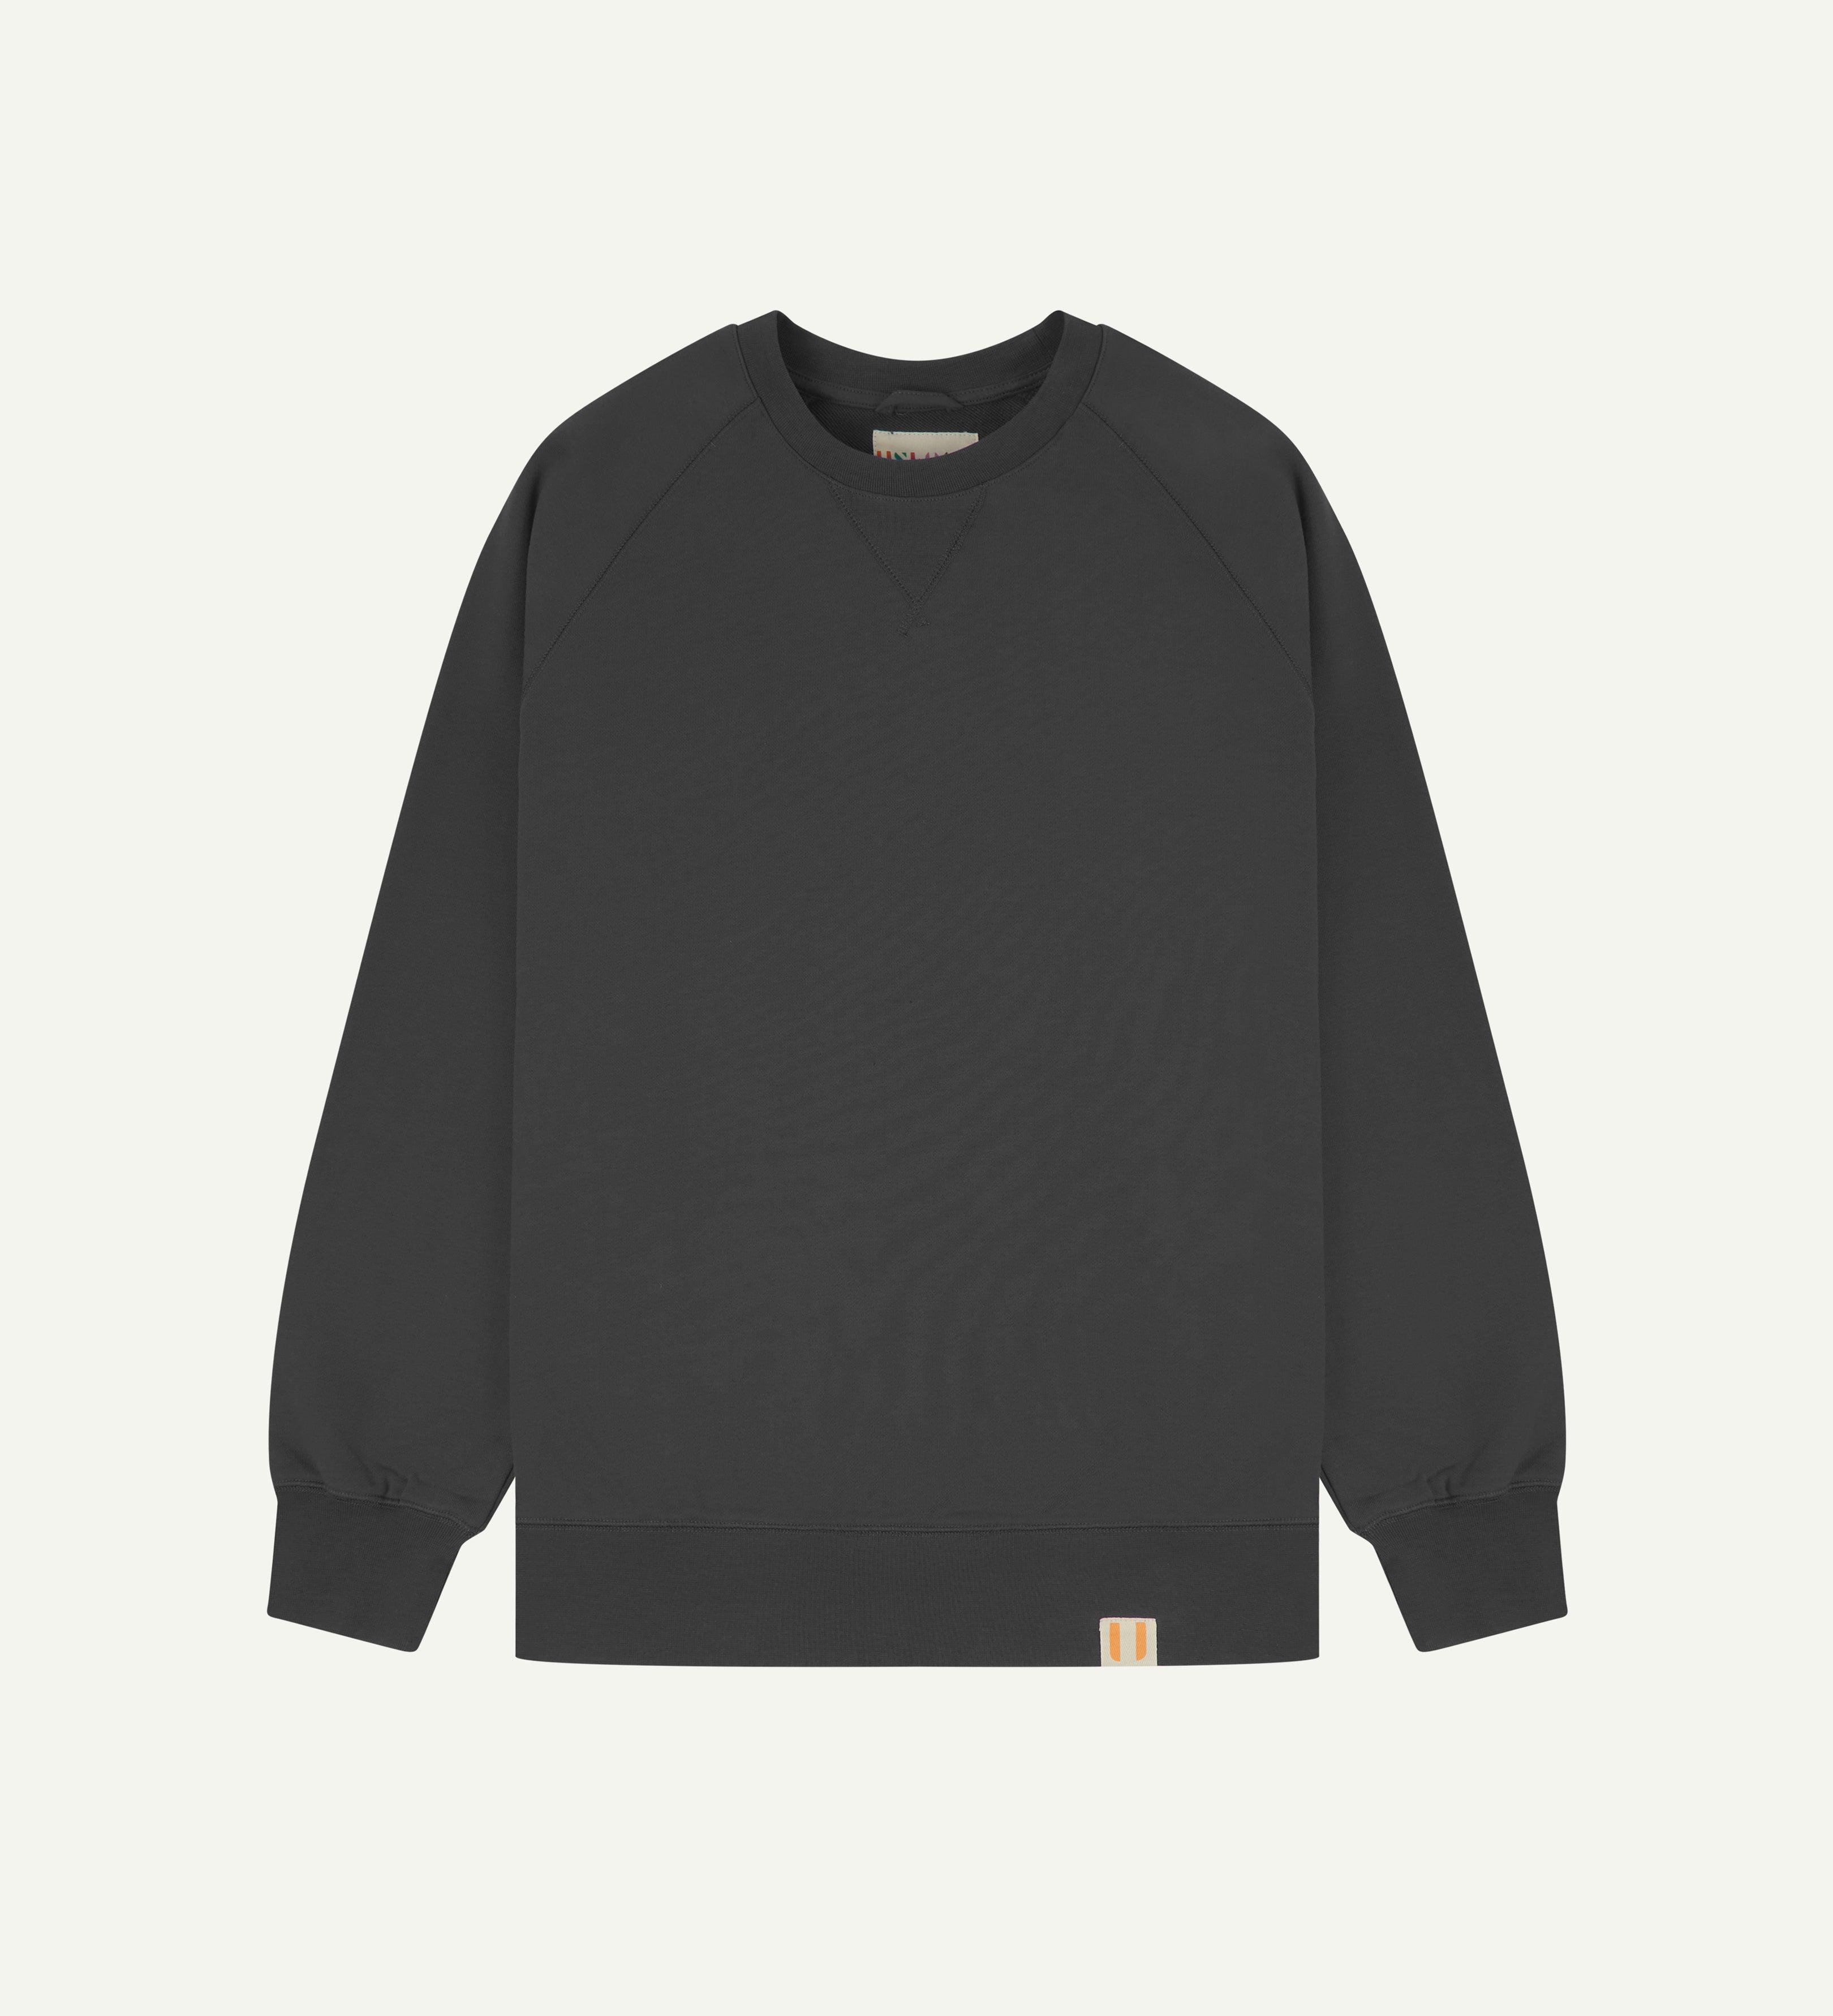 Front view of dark grey organic heavyweight cotton #7005 jersey sweatshirt by Uskees